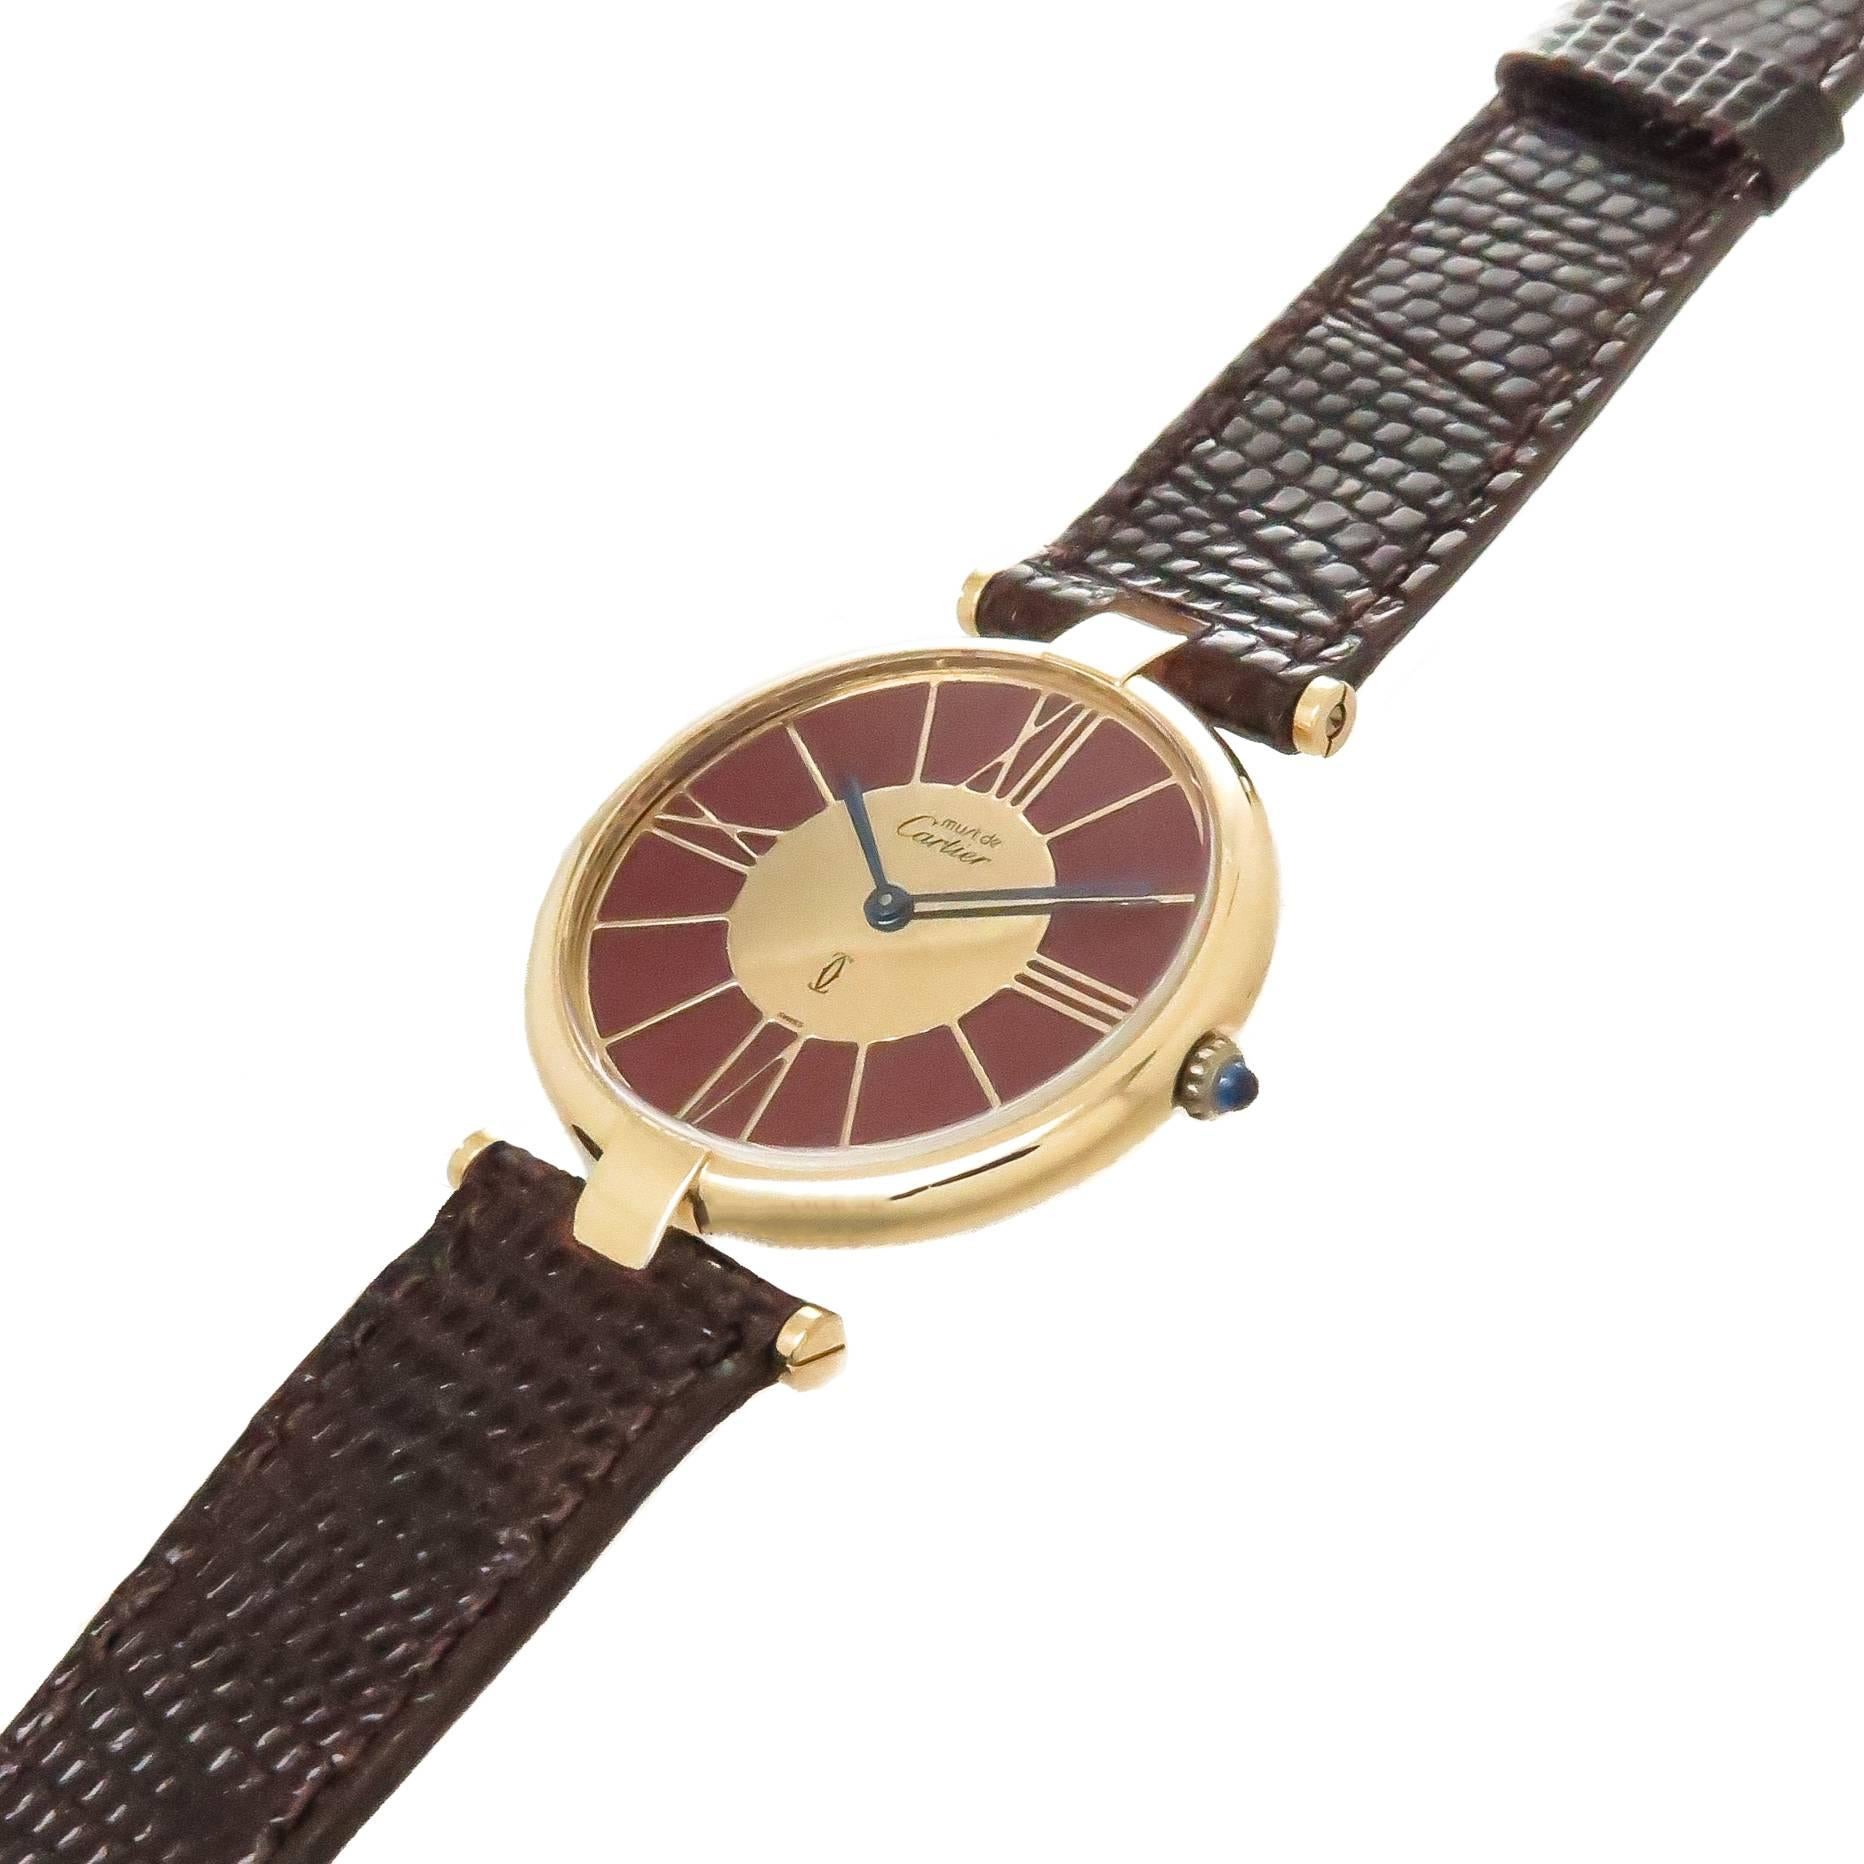 Circa 1990s Cartier Vendome Vermeil ( Gold plate on Sterling Silver ) Wrist Watch. 30 MM 2 piece case, unusual Burgundy and Gold Dial, Quartz movement, Sapphire Crown. New Burgundy Lizard Strap and original Cartier Gold Plate Tang buckle, watch